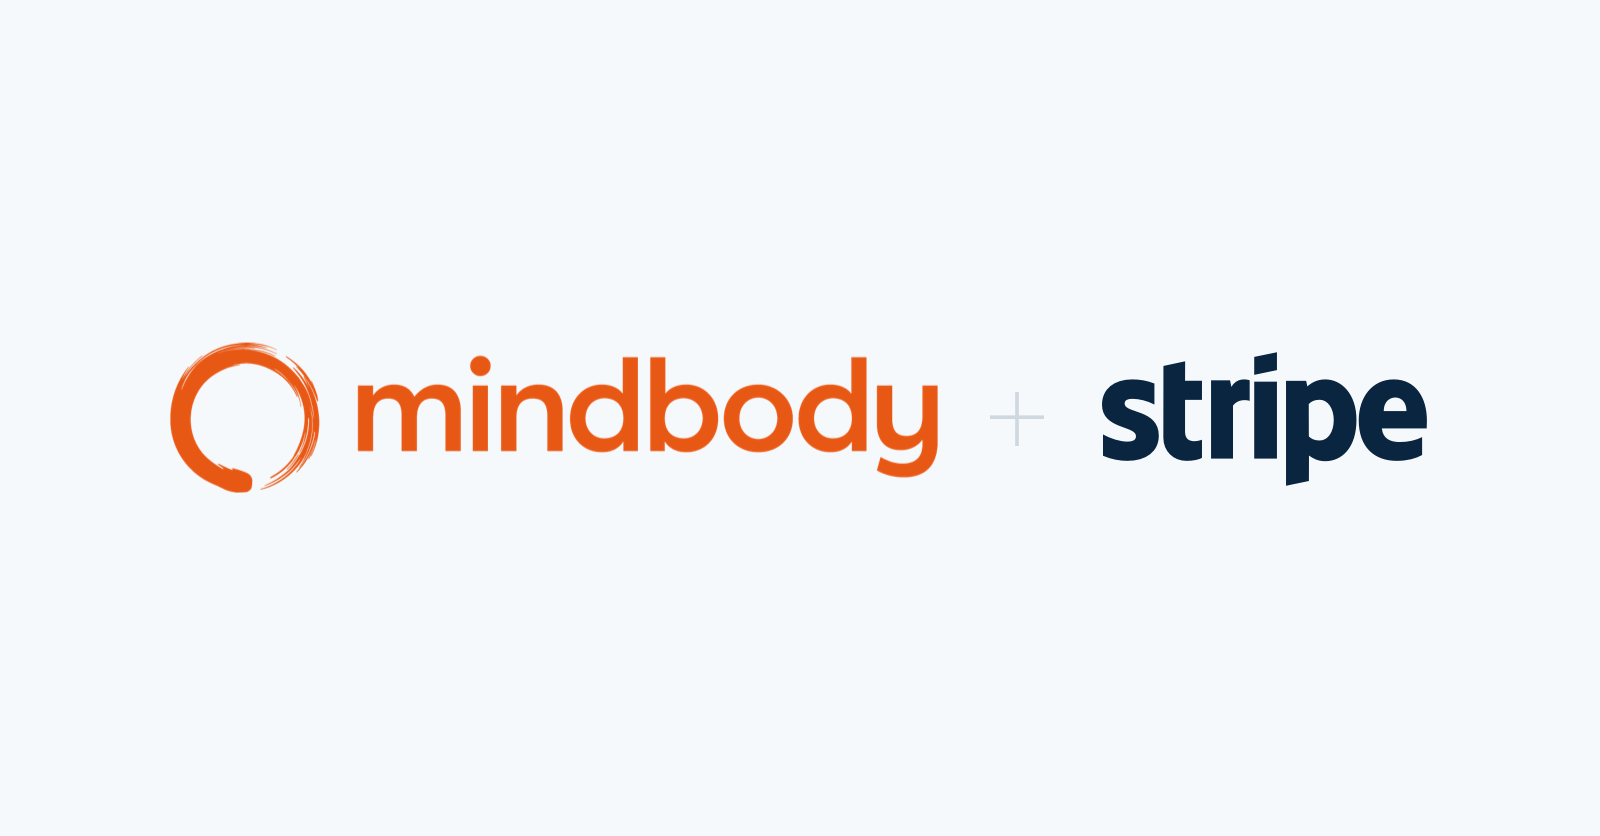 Mindbody teams up with Stripe to fuel expansion in North America and Europe